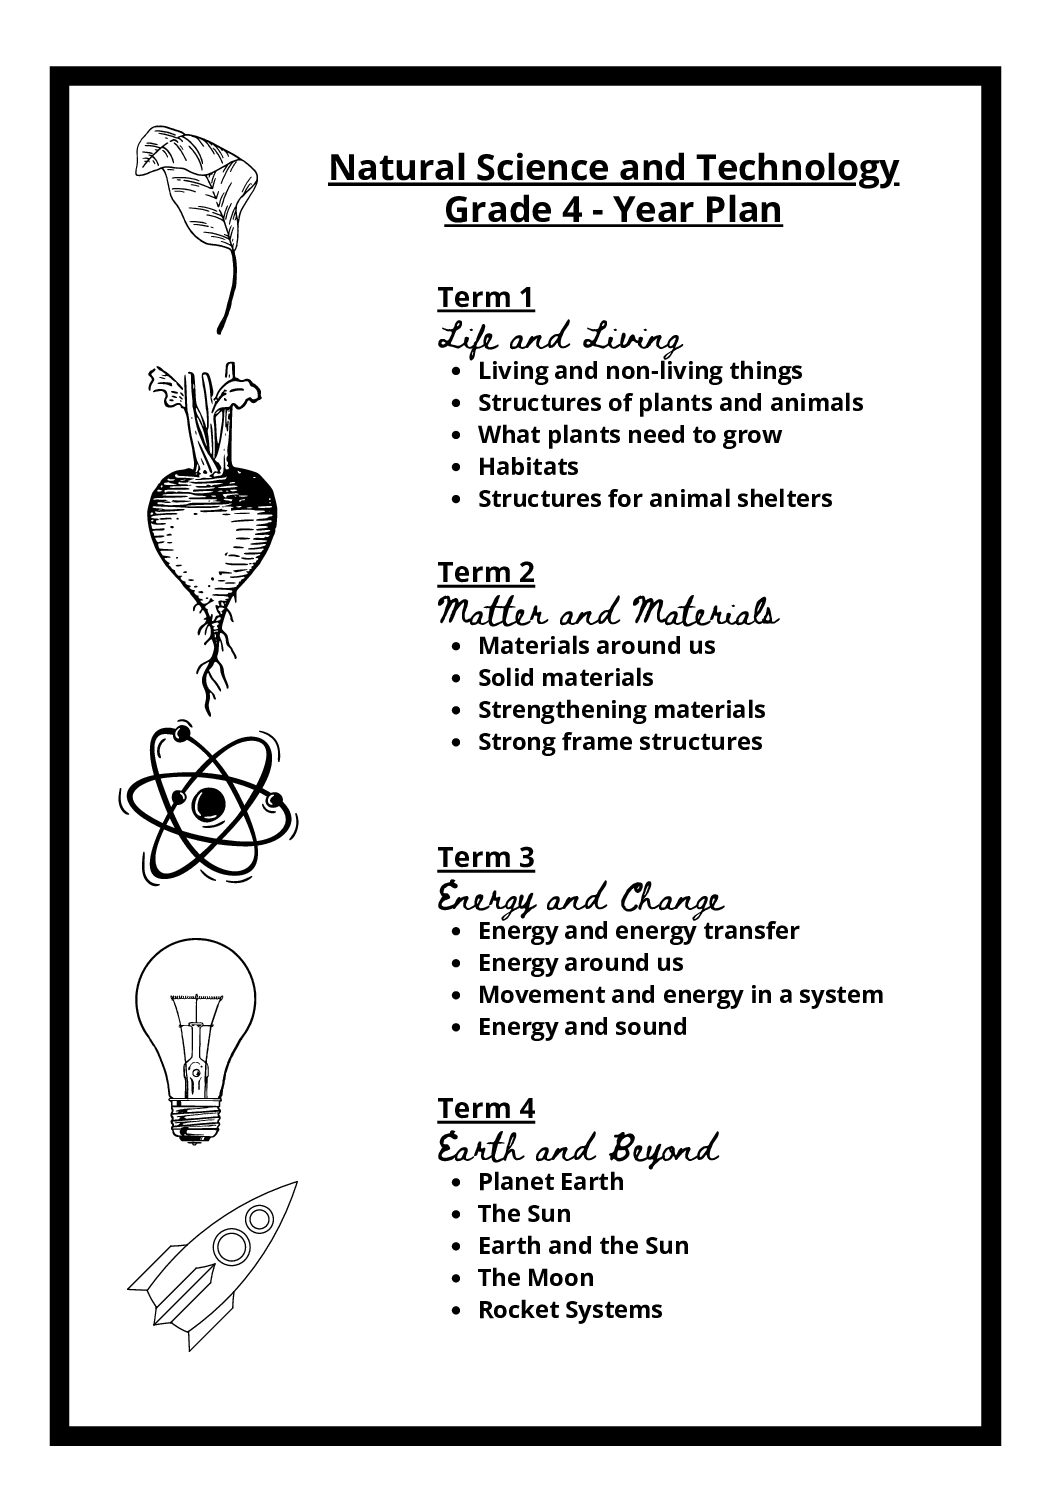 year plans for natural science technology grade 4 5 and 6 teacha